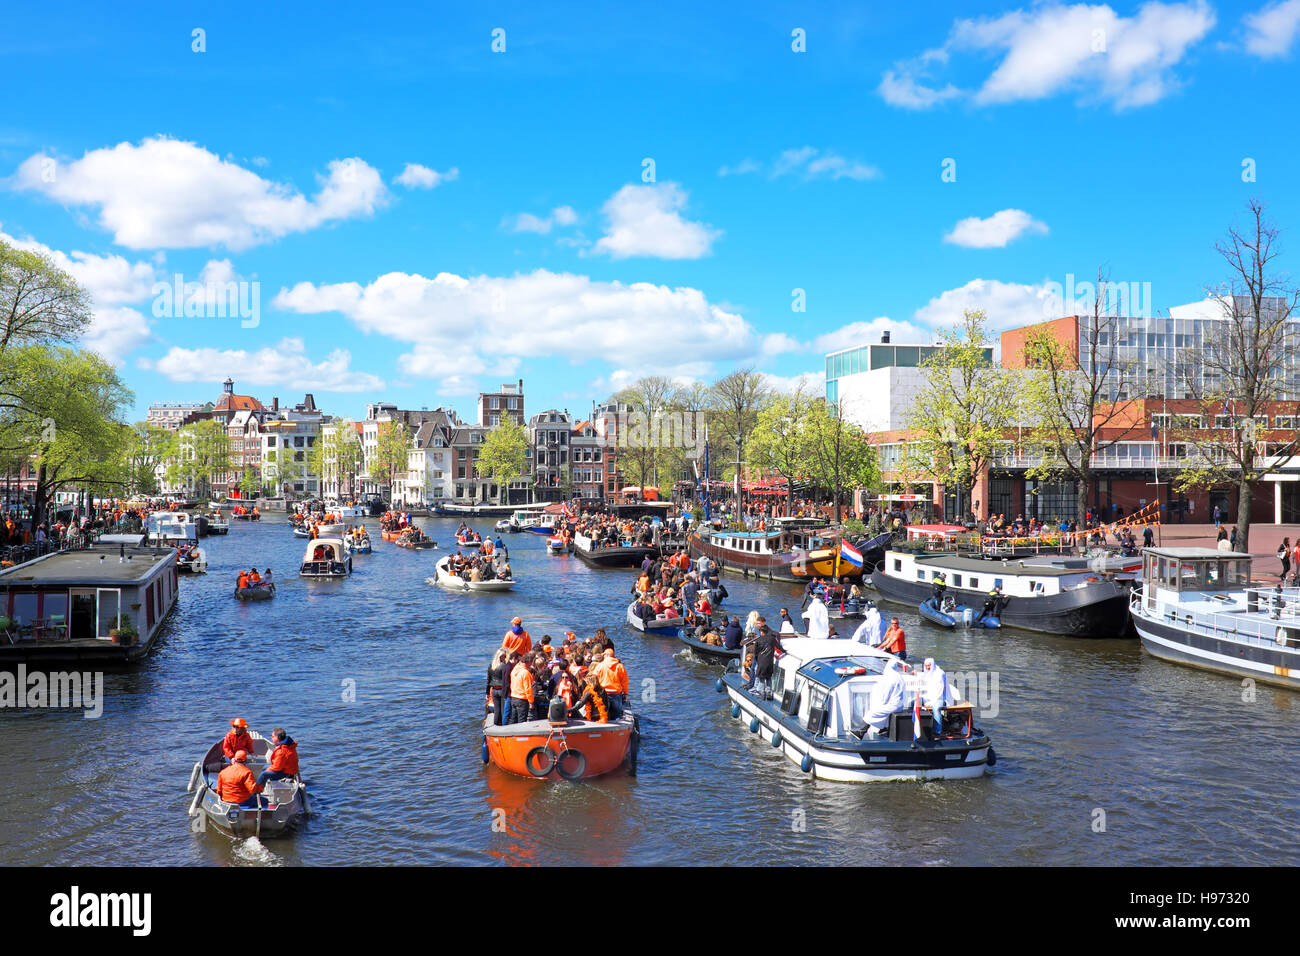 APRIL 27: Amsterdam canals full of boats and people in orange during the celebration of kings day on April 27, 2015 in Amsterdam, The Netherlands Stock Photo